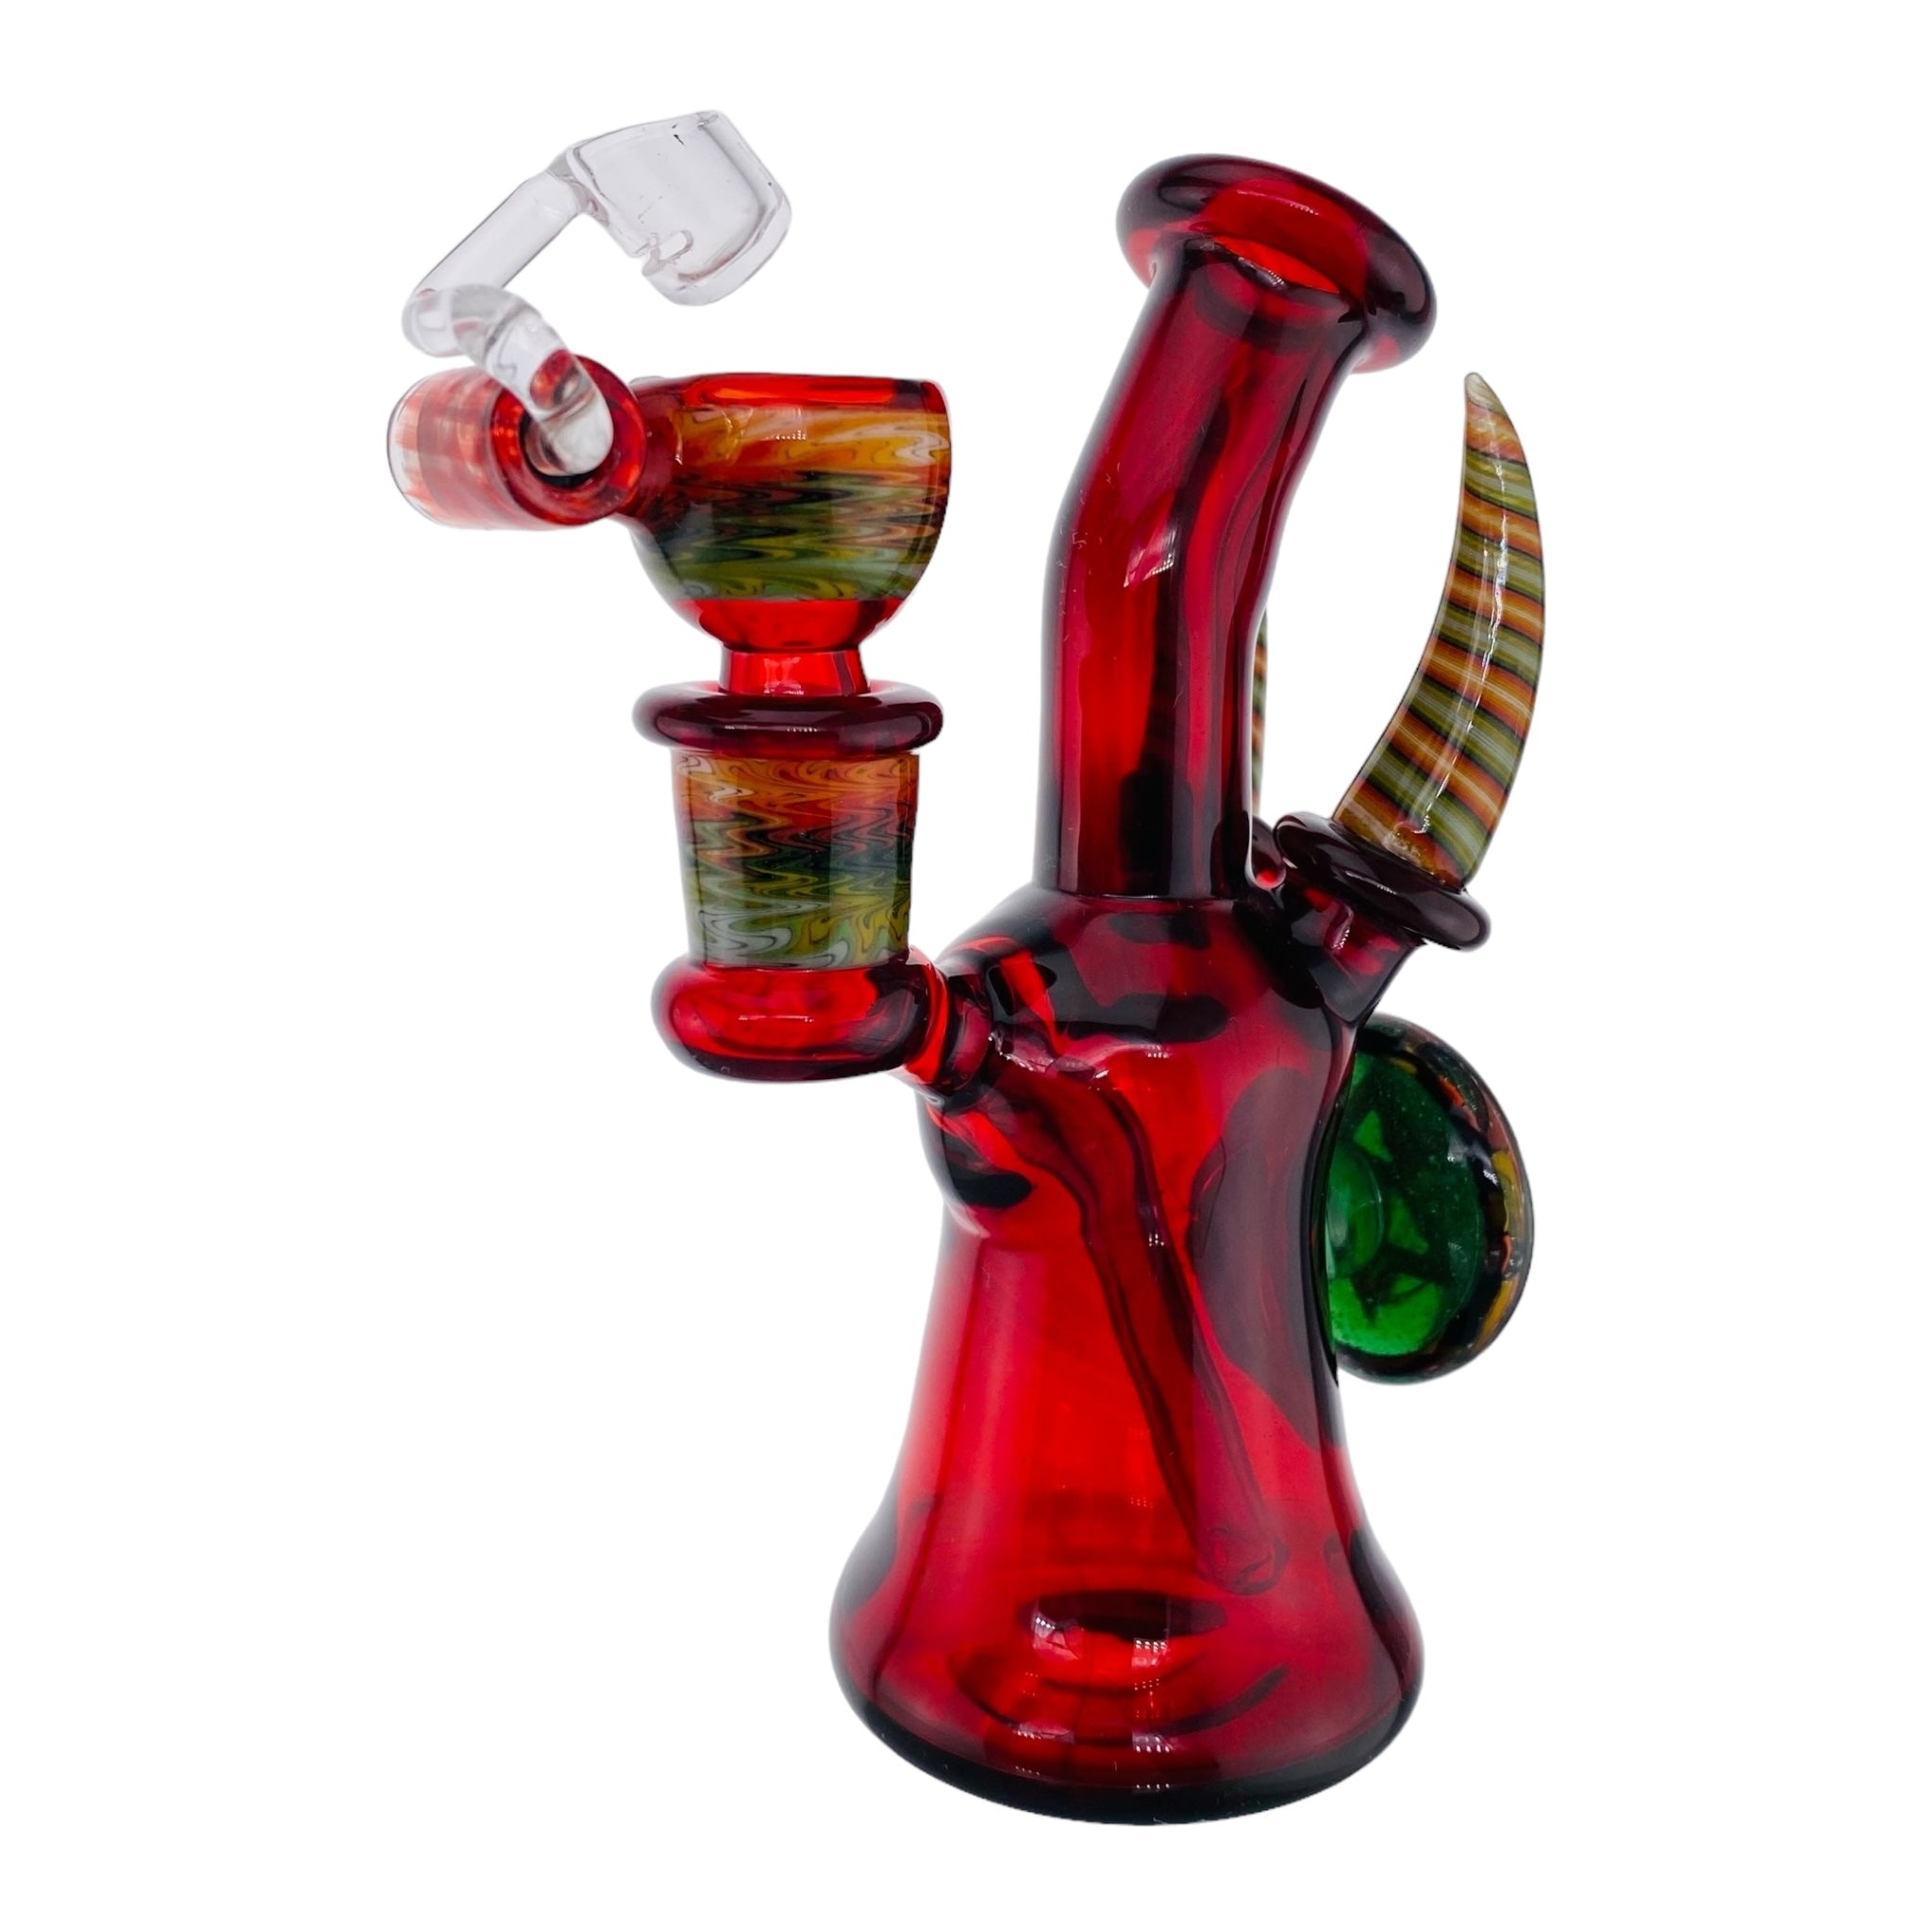 heady bong or dab rig or hash and weed by Ty Watts Glass Pomegranate Banger Hanger With Bucket Set